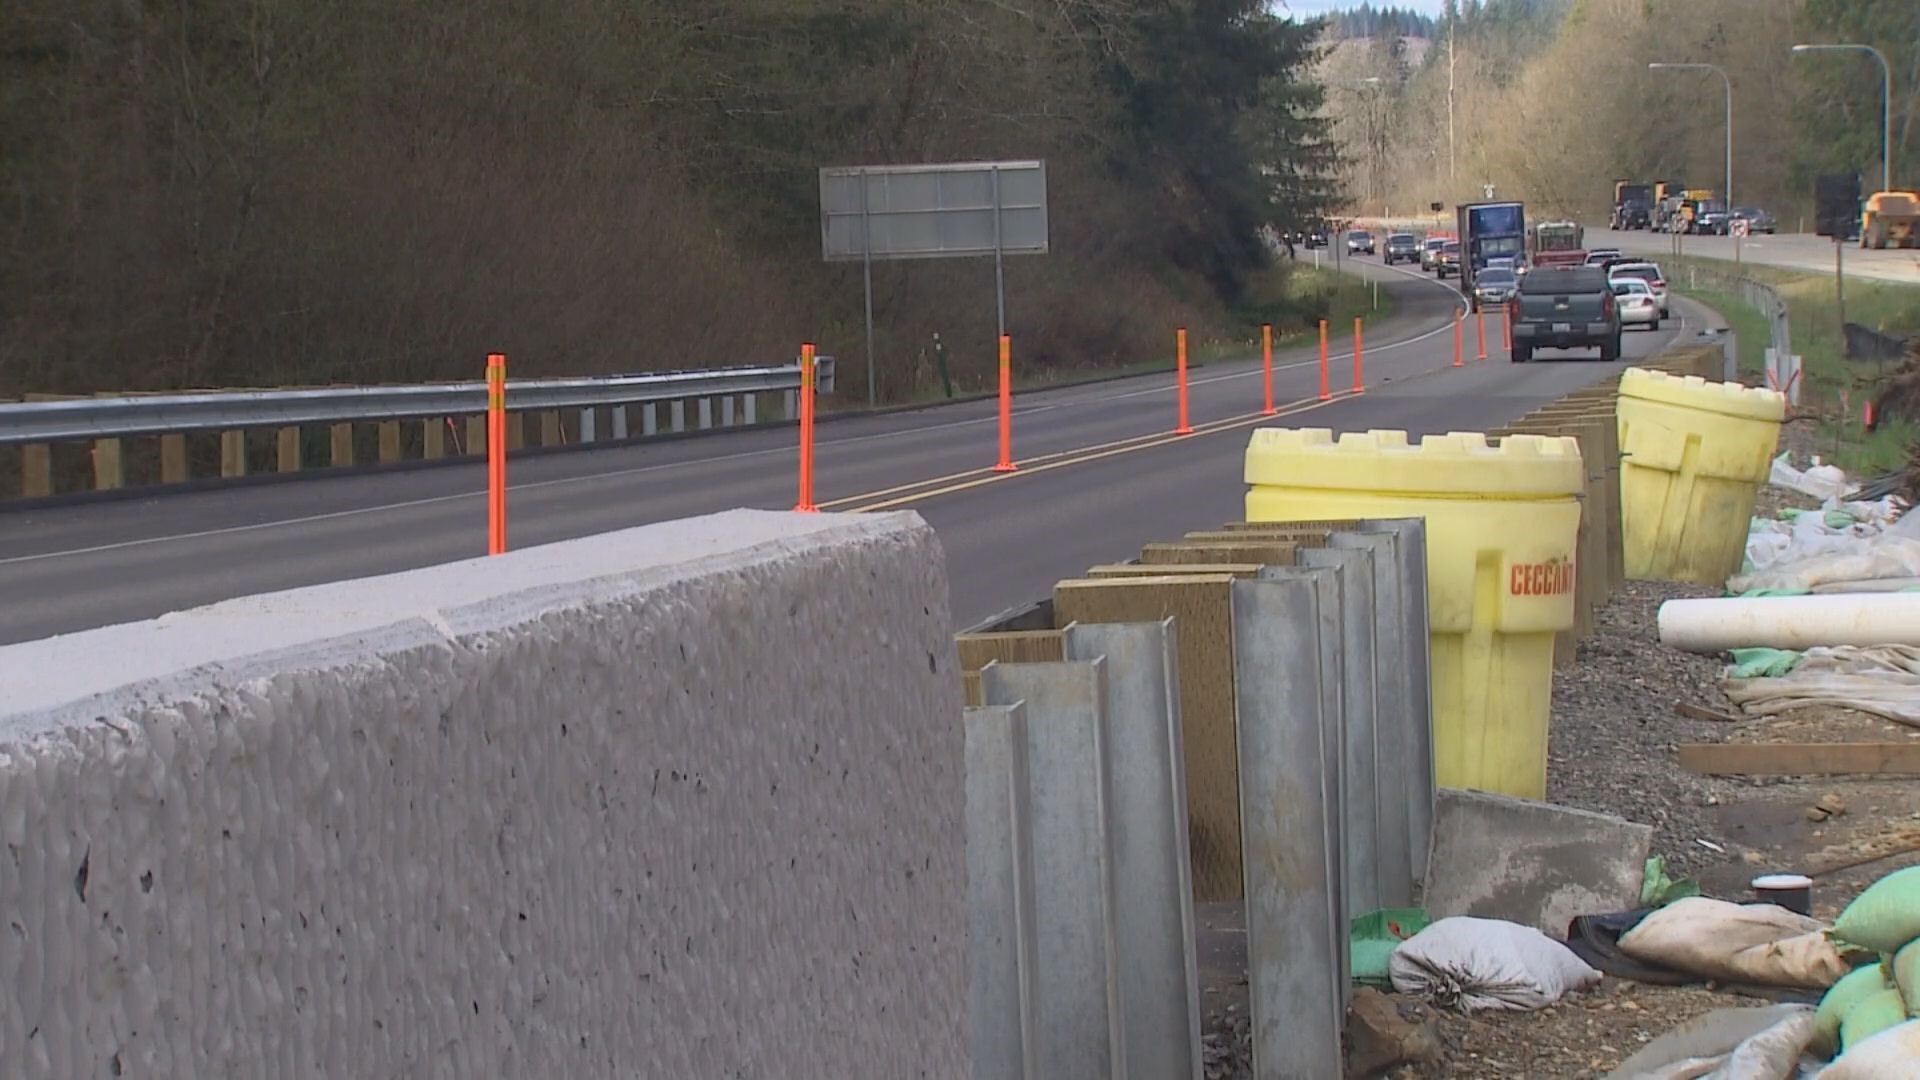 Leaders from the House and Senate told KING 5 to expect some projects to be delayed as new money is raised.